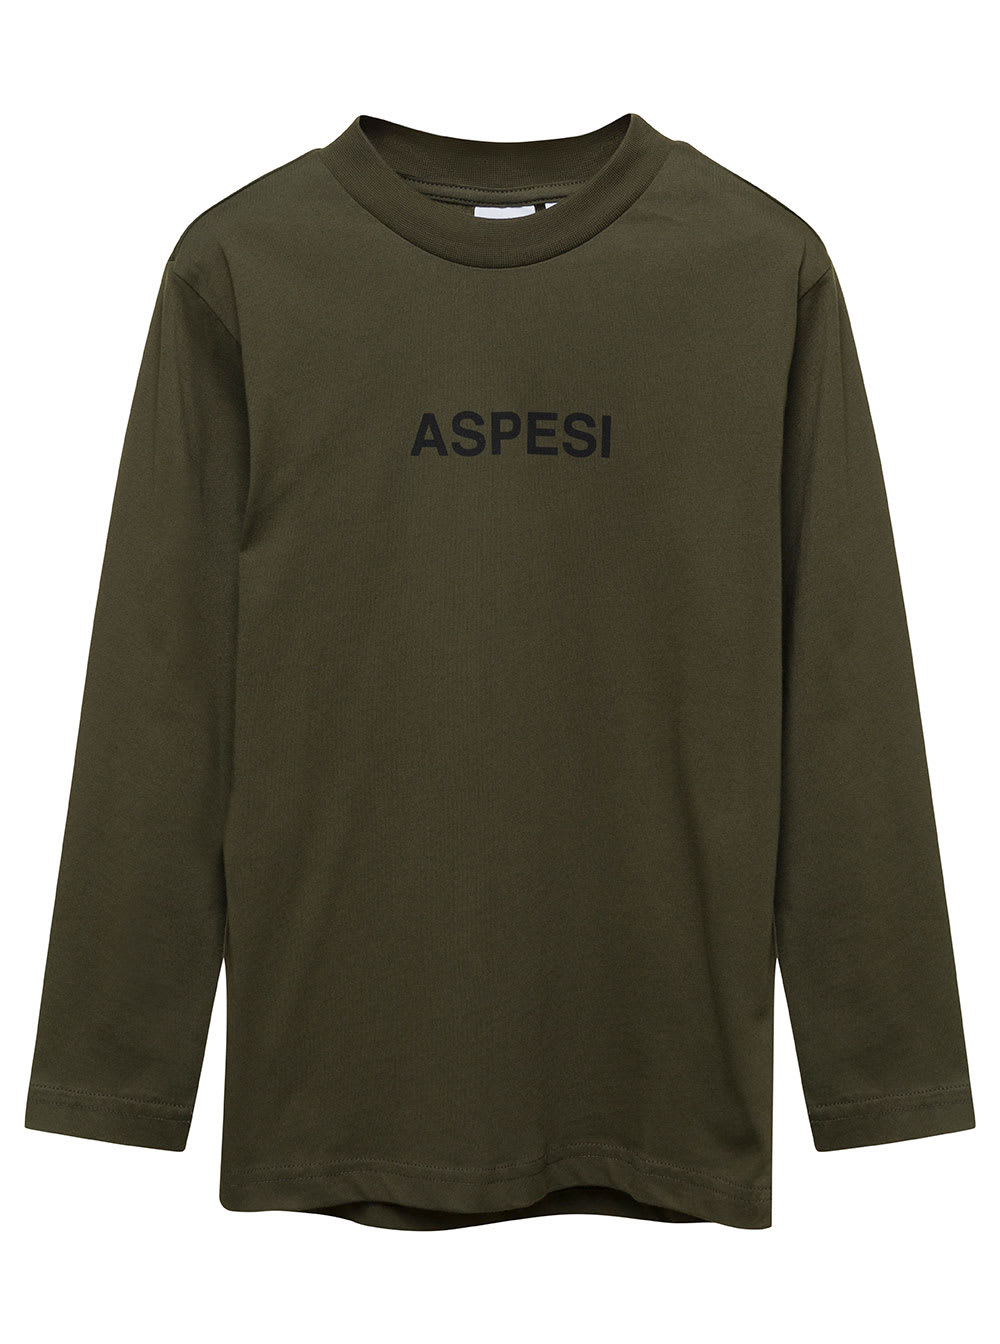 ASPESI GREEN LONG-SLEEVED T-SHIRT WITH CONTRASTING LOGO IN COTTON BOY